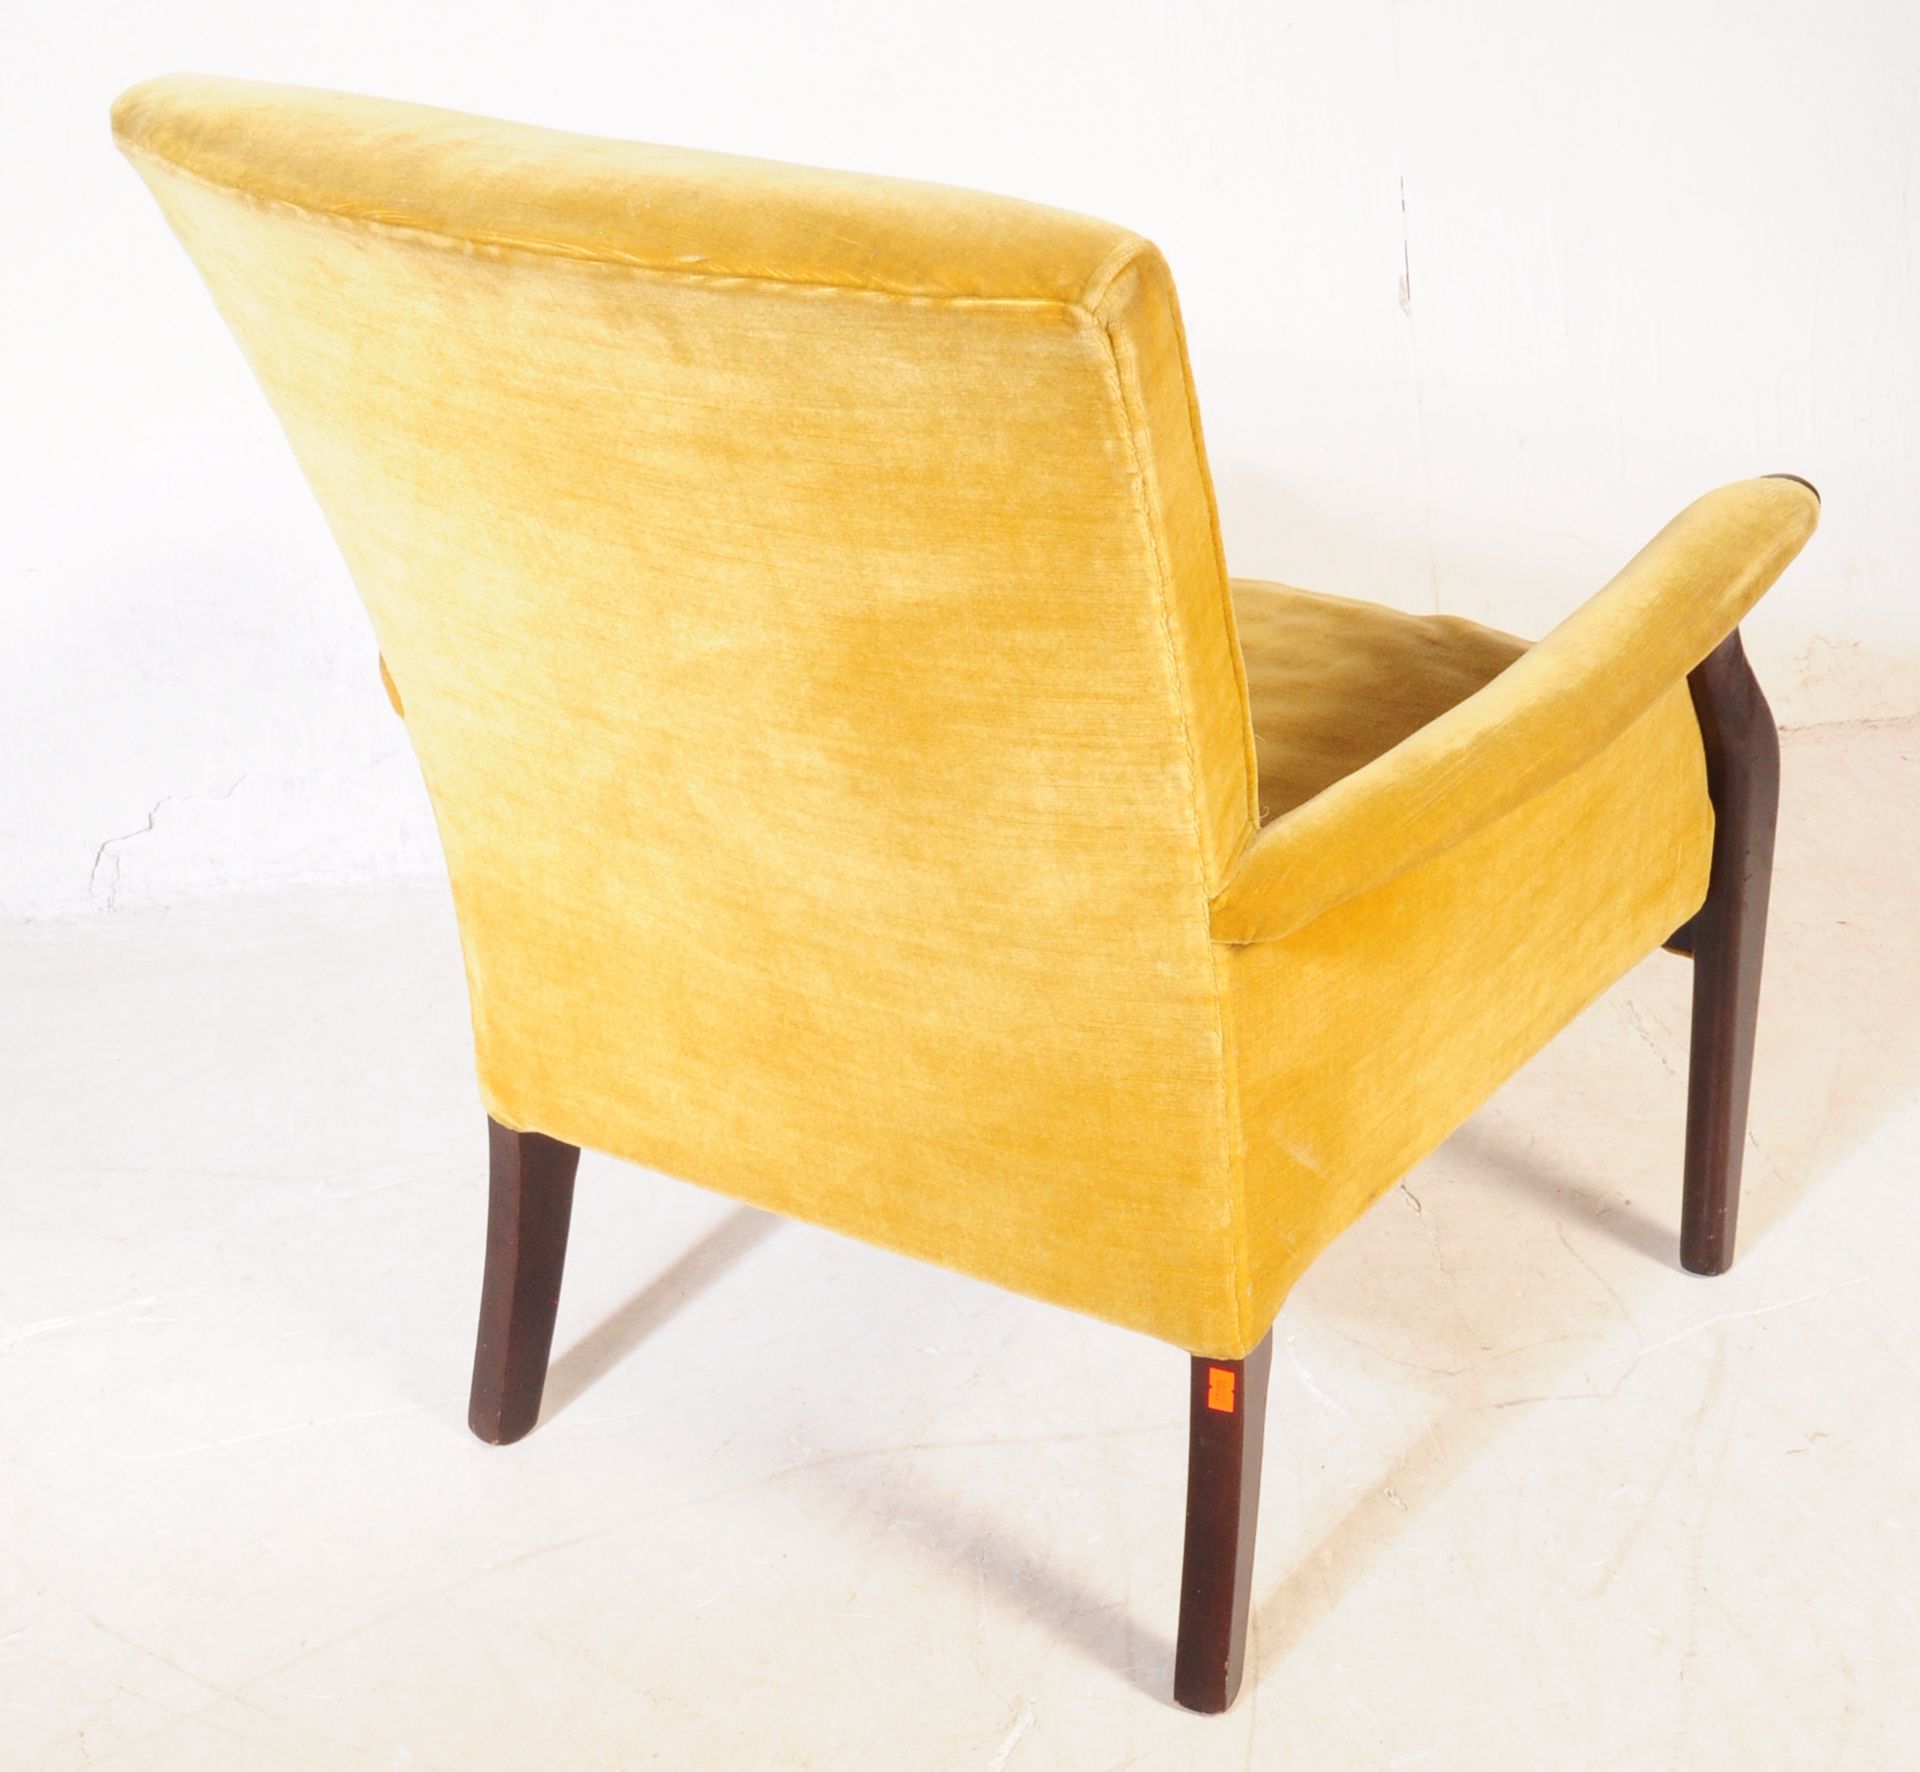 PARKER KNOLL - MID 20TH CENTURY RETRO YELLOW ARMCHAIR - Image 3 of 3